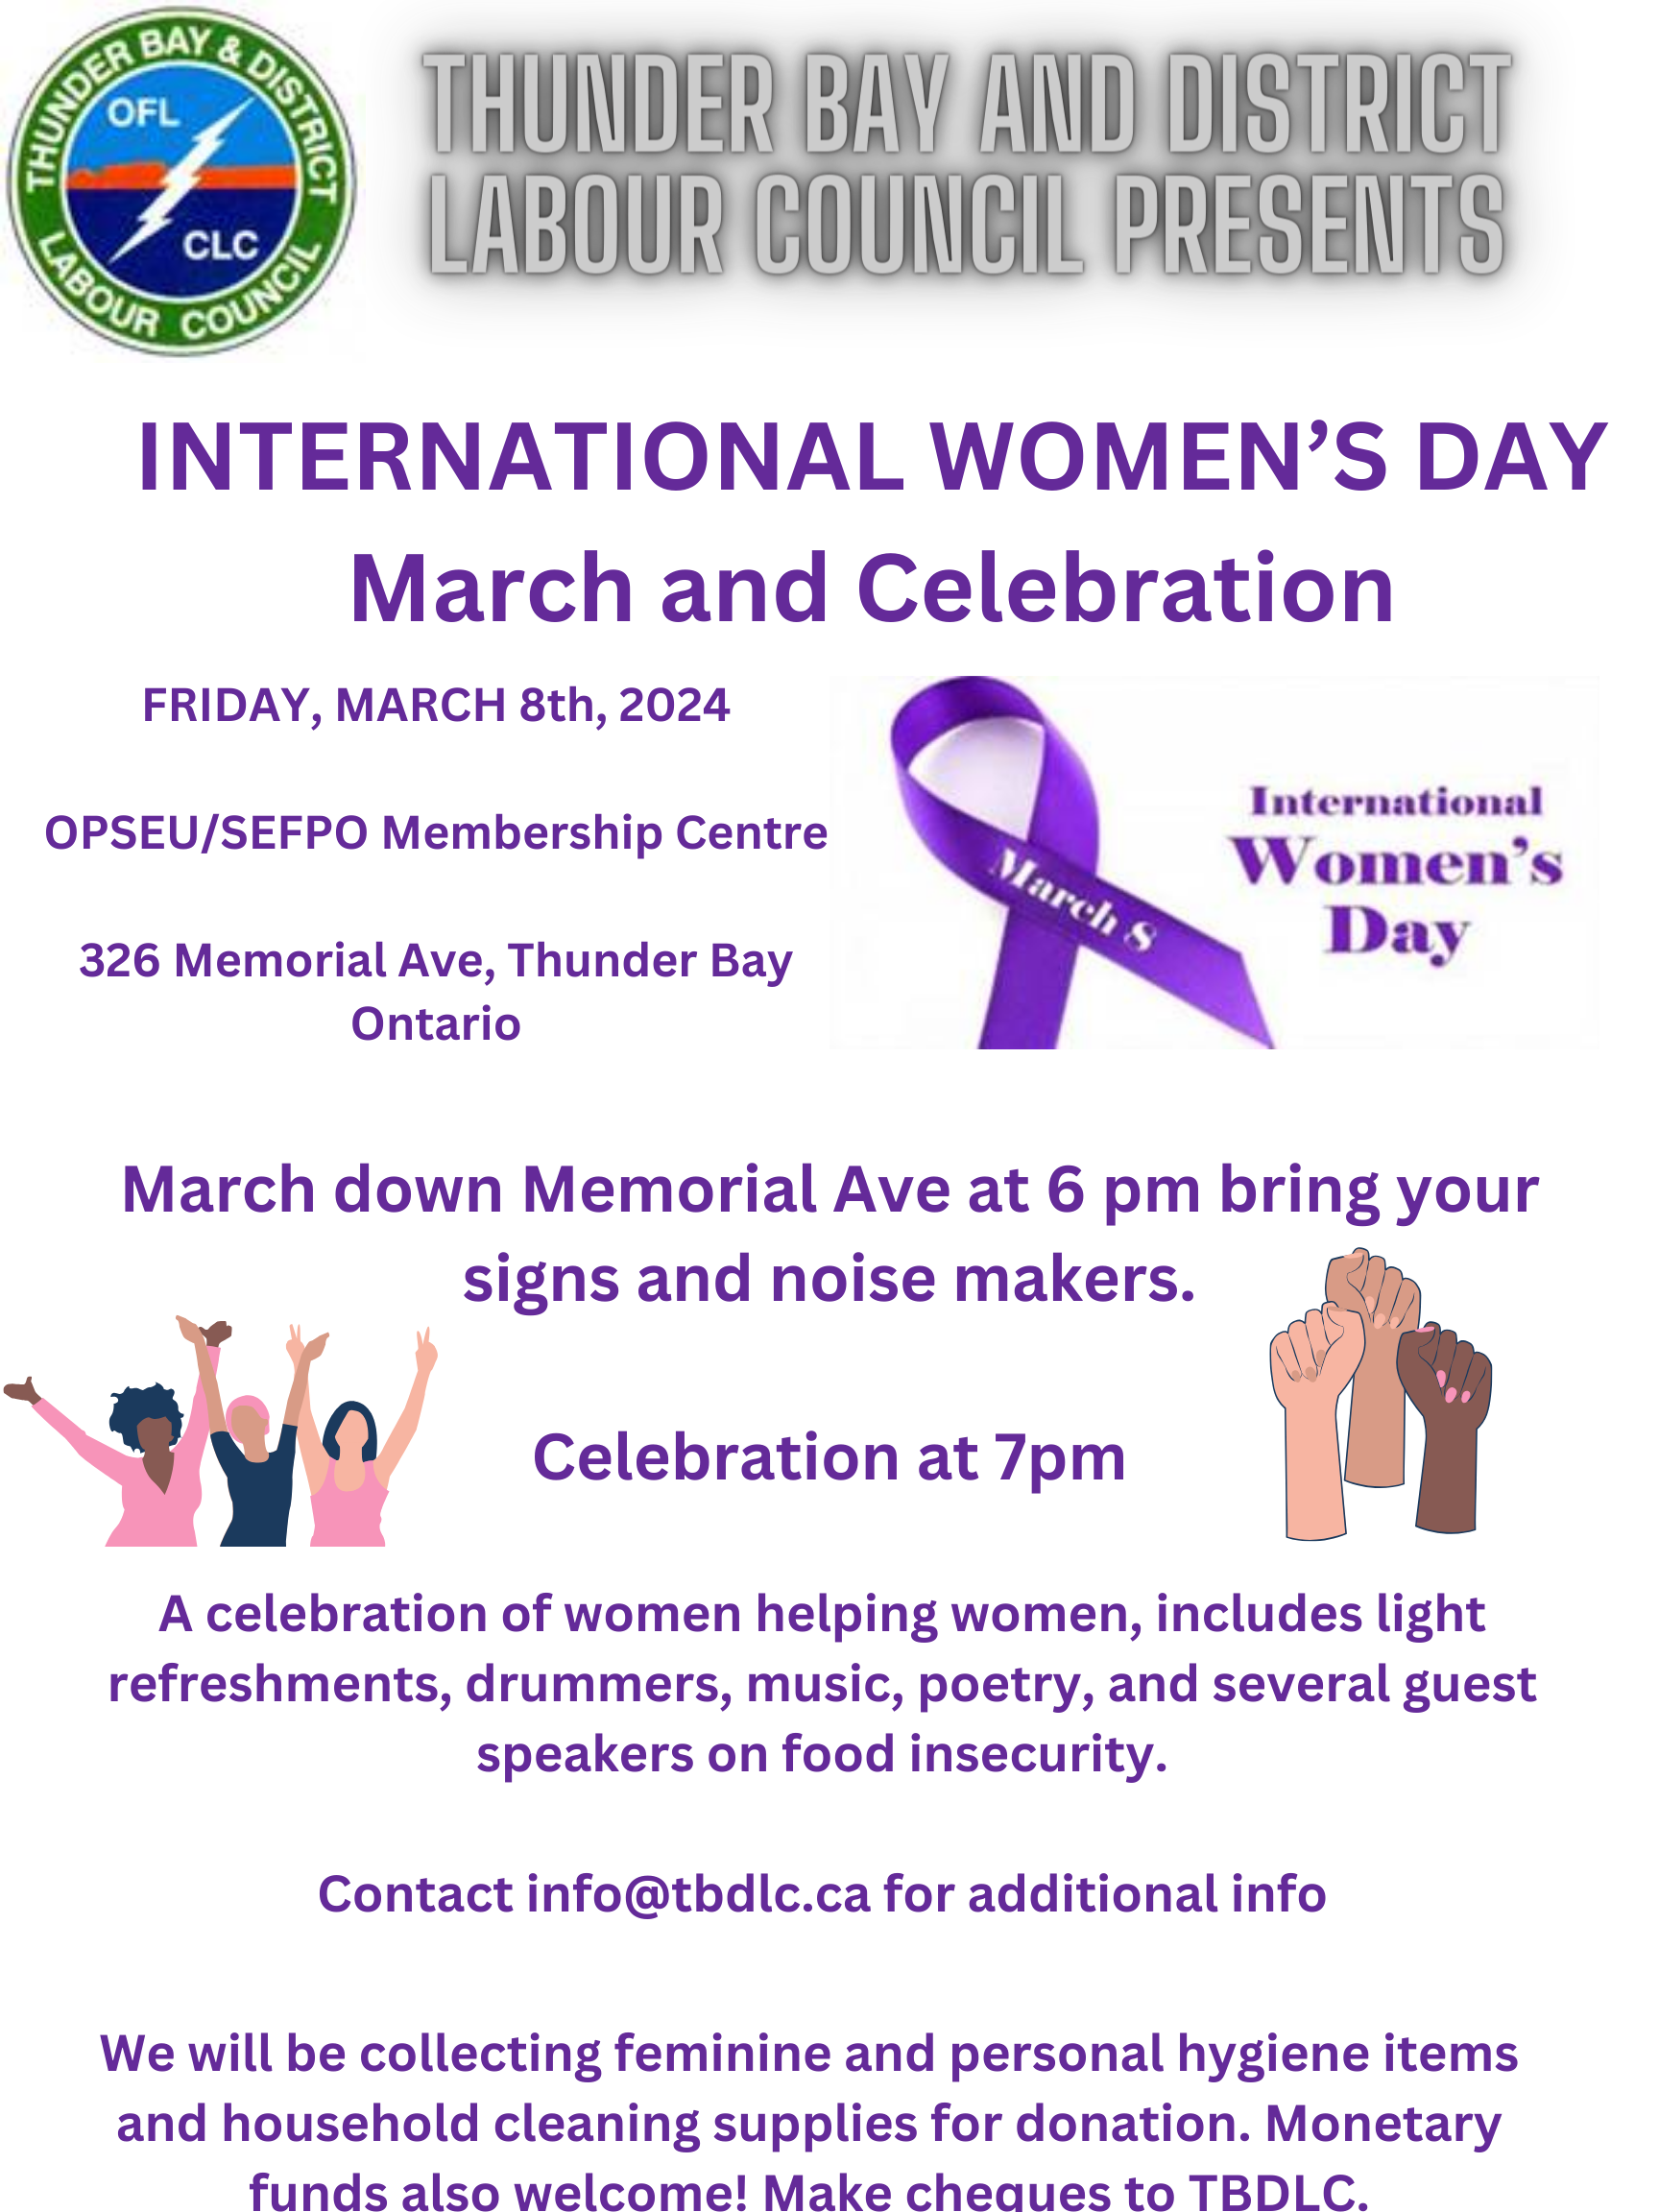 International Women’s Day March and Celebration